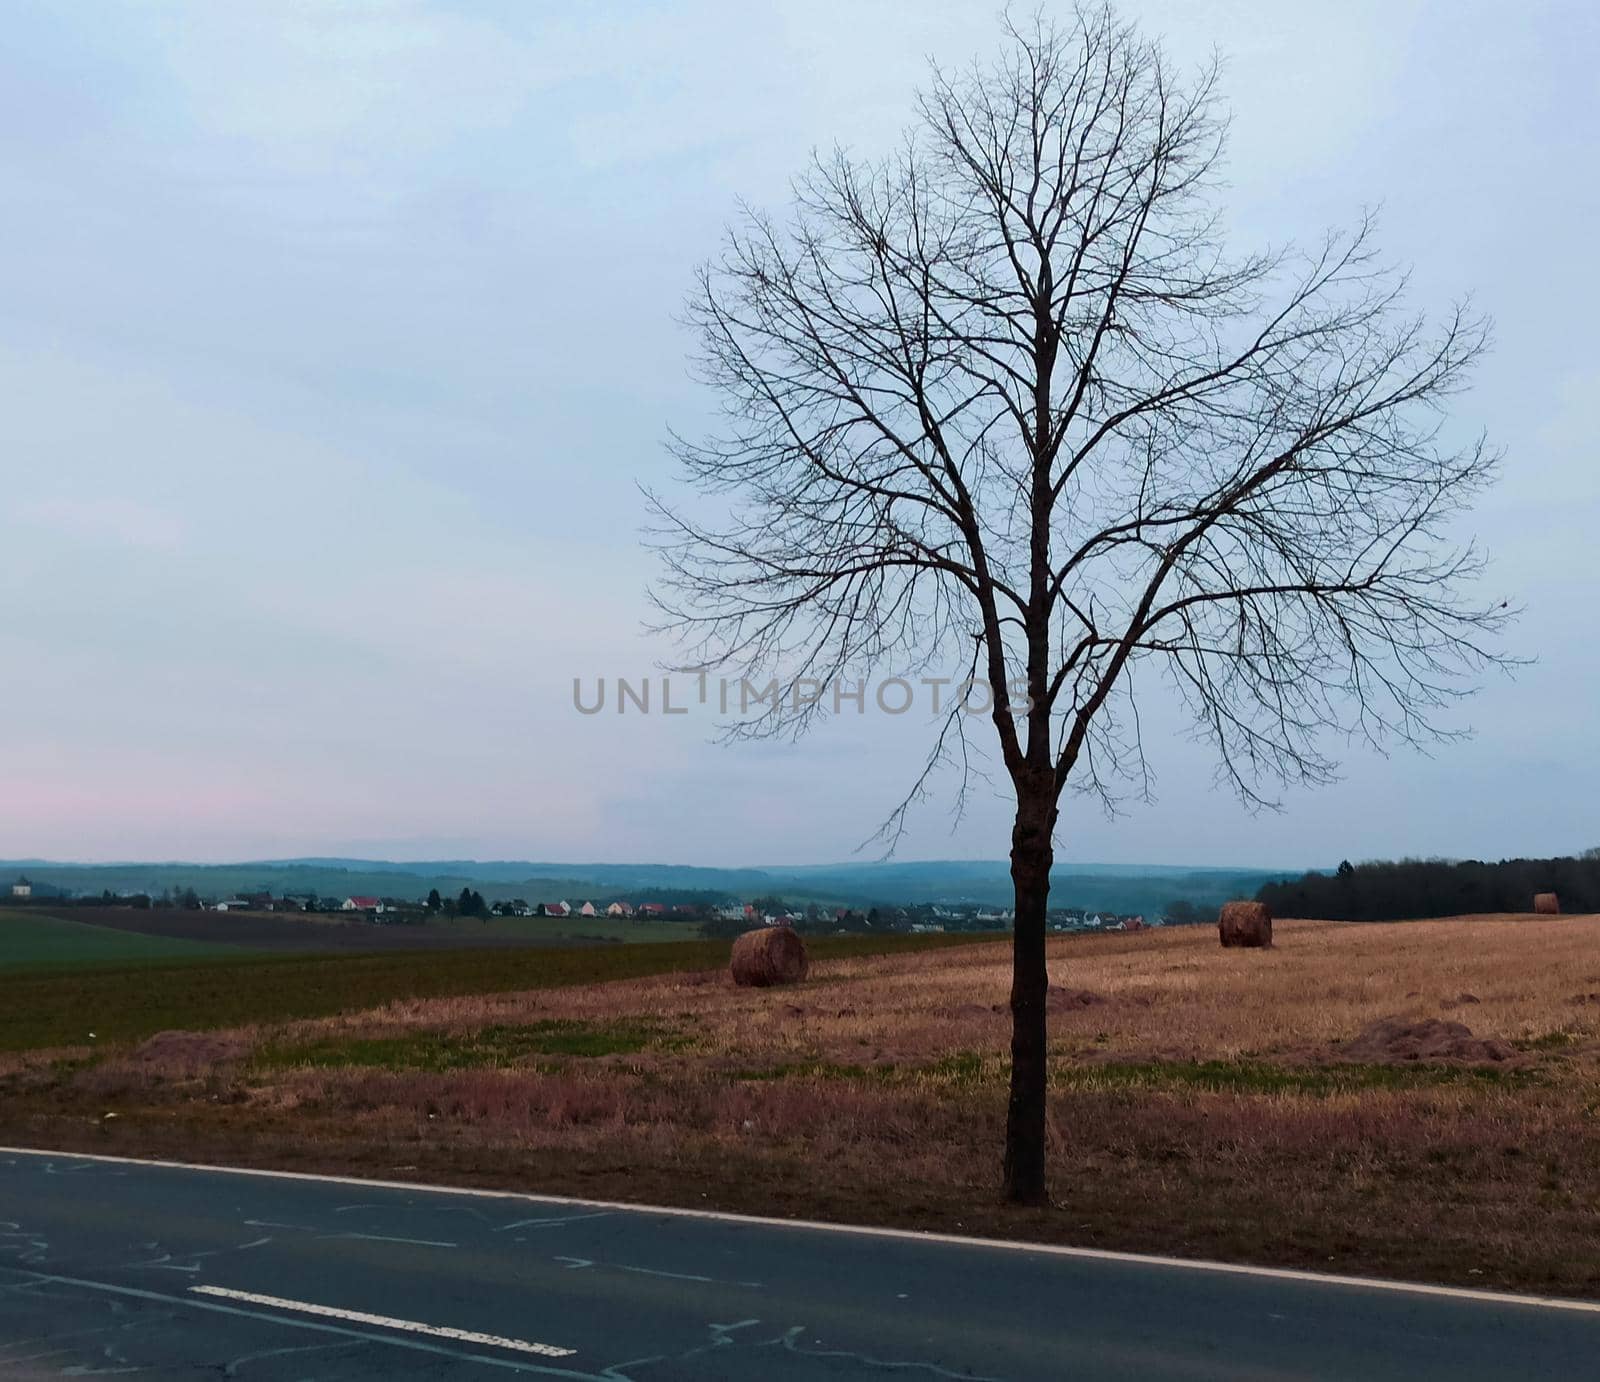 Lonely tree in the field. Symbolic display of loneliness.